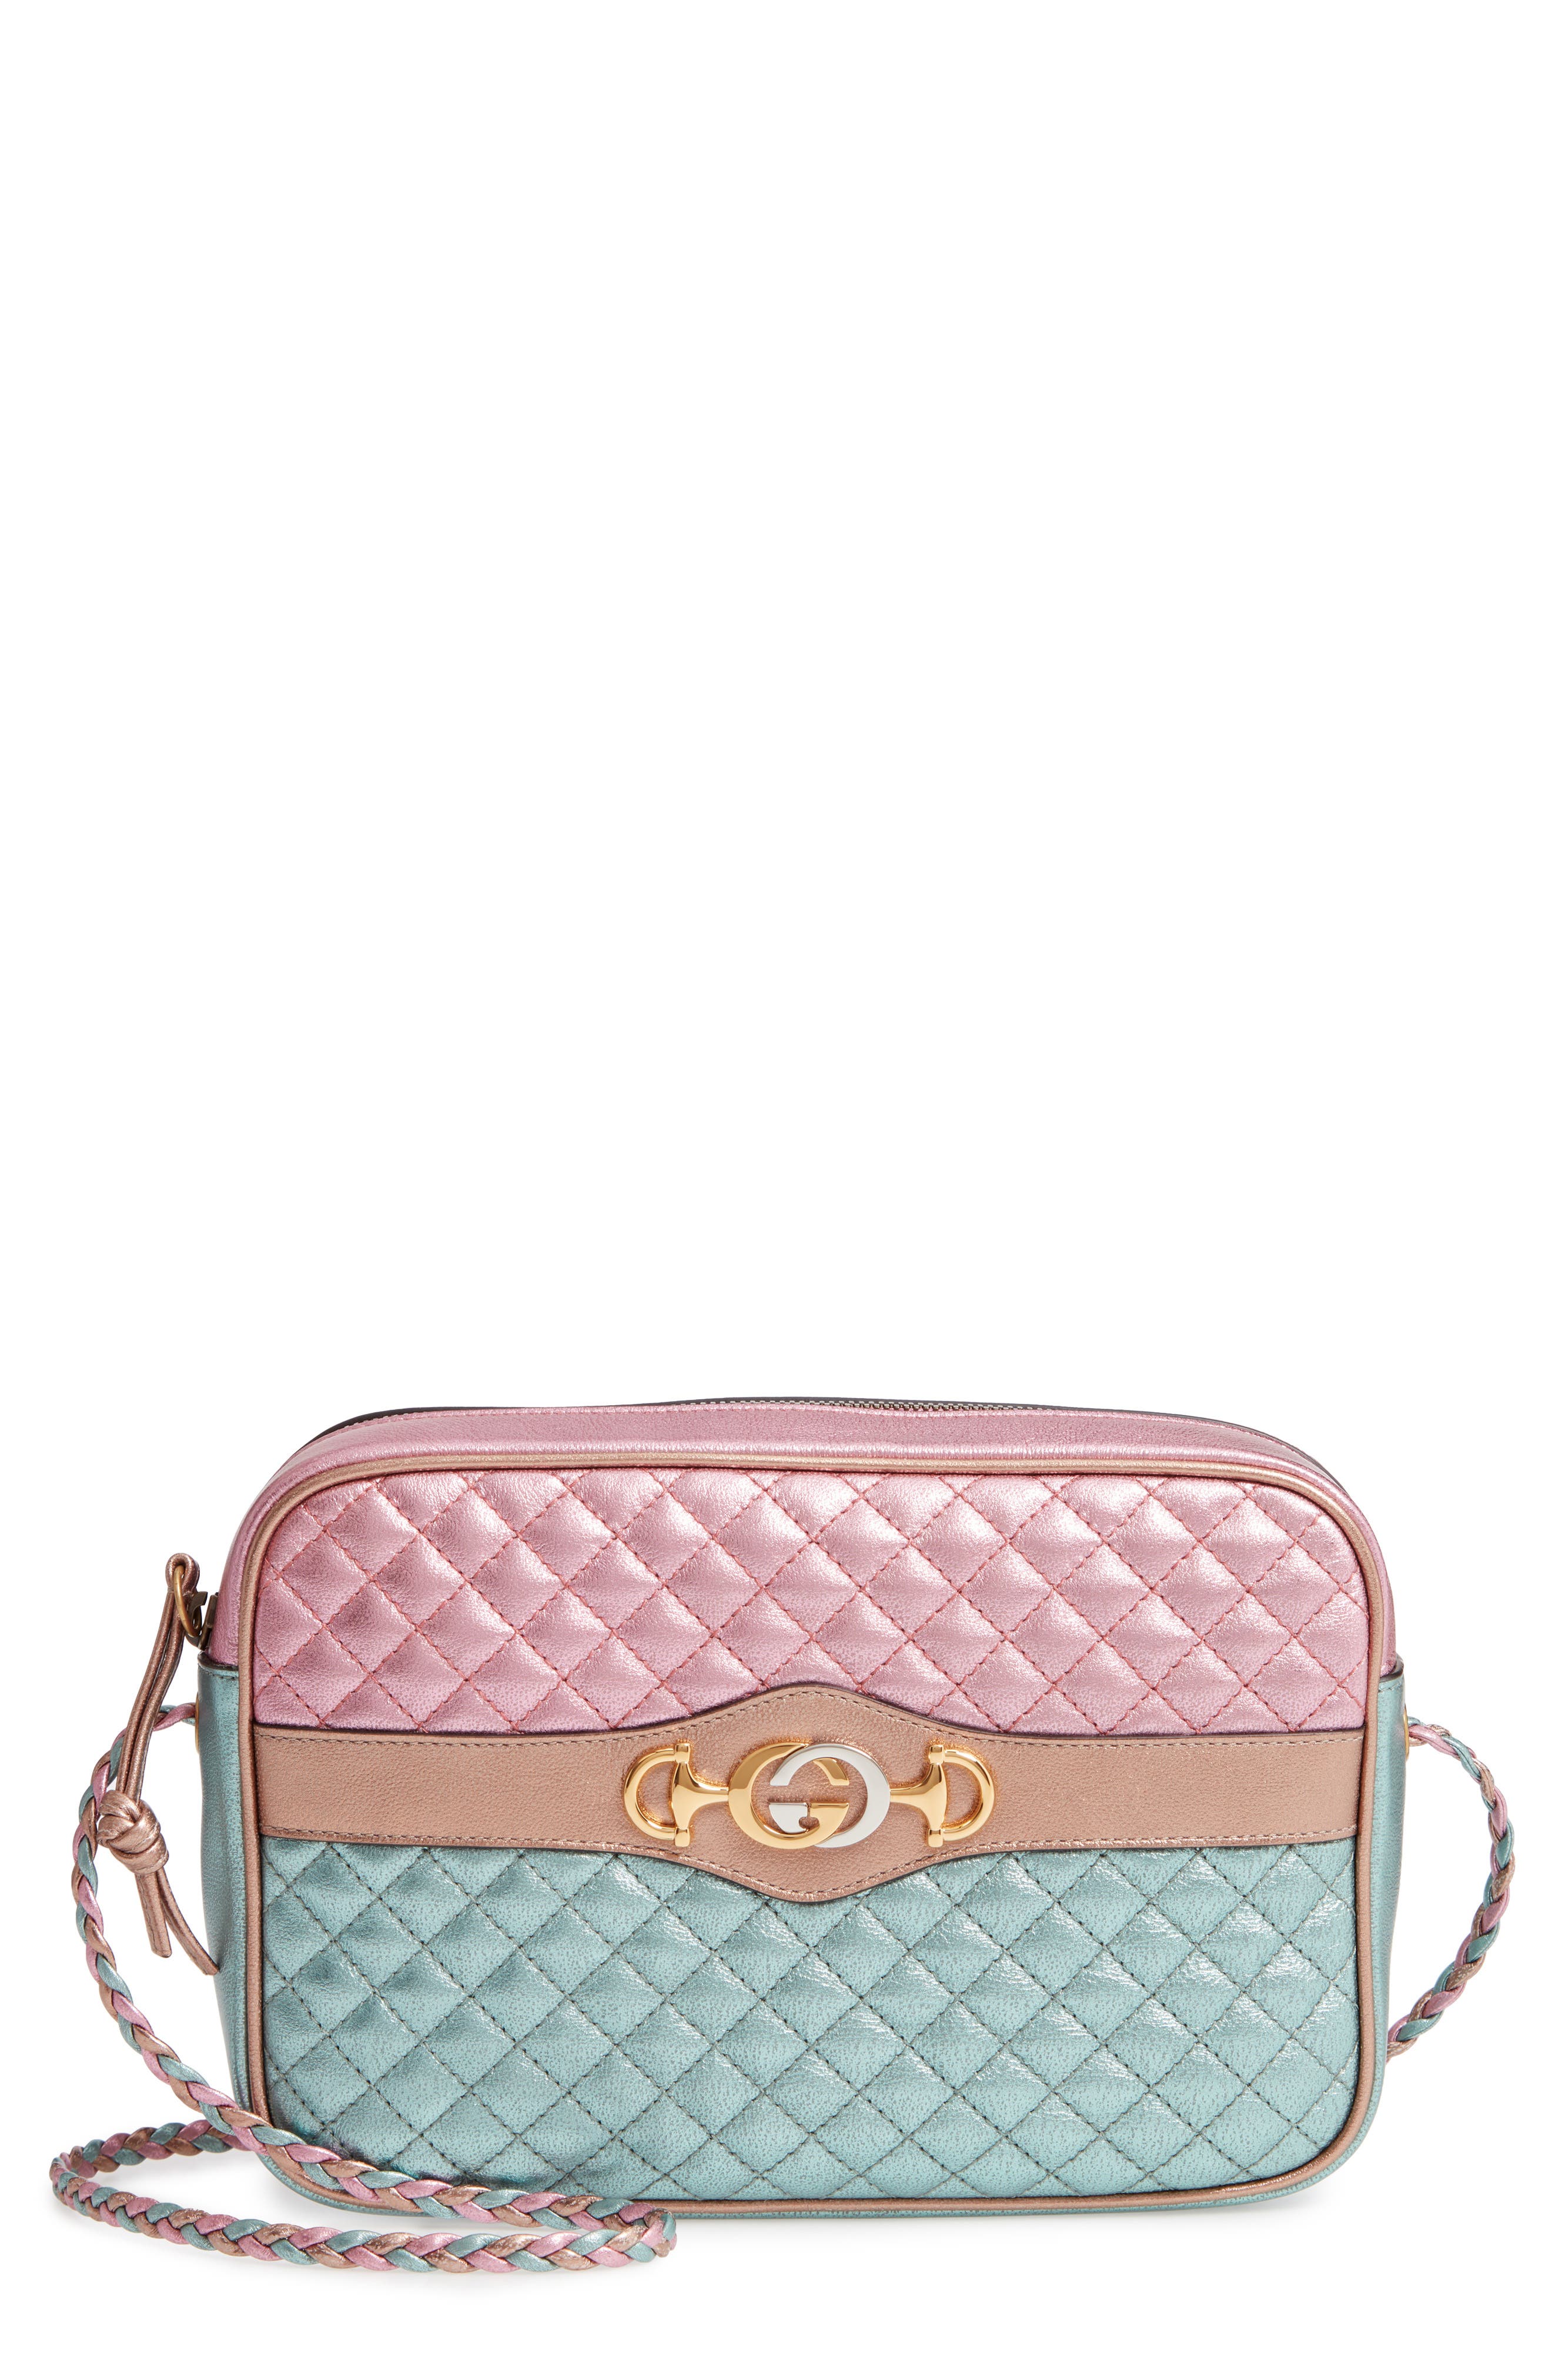 quilted gucci bag